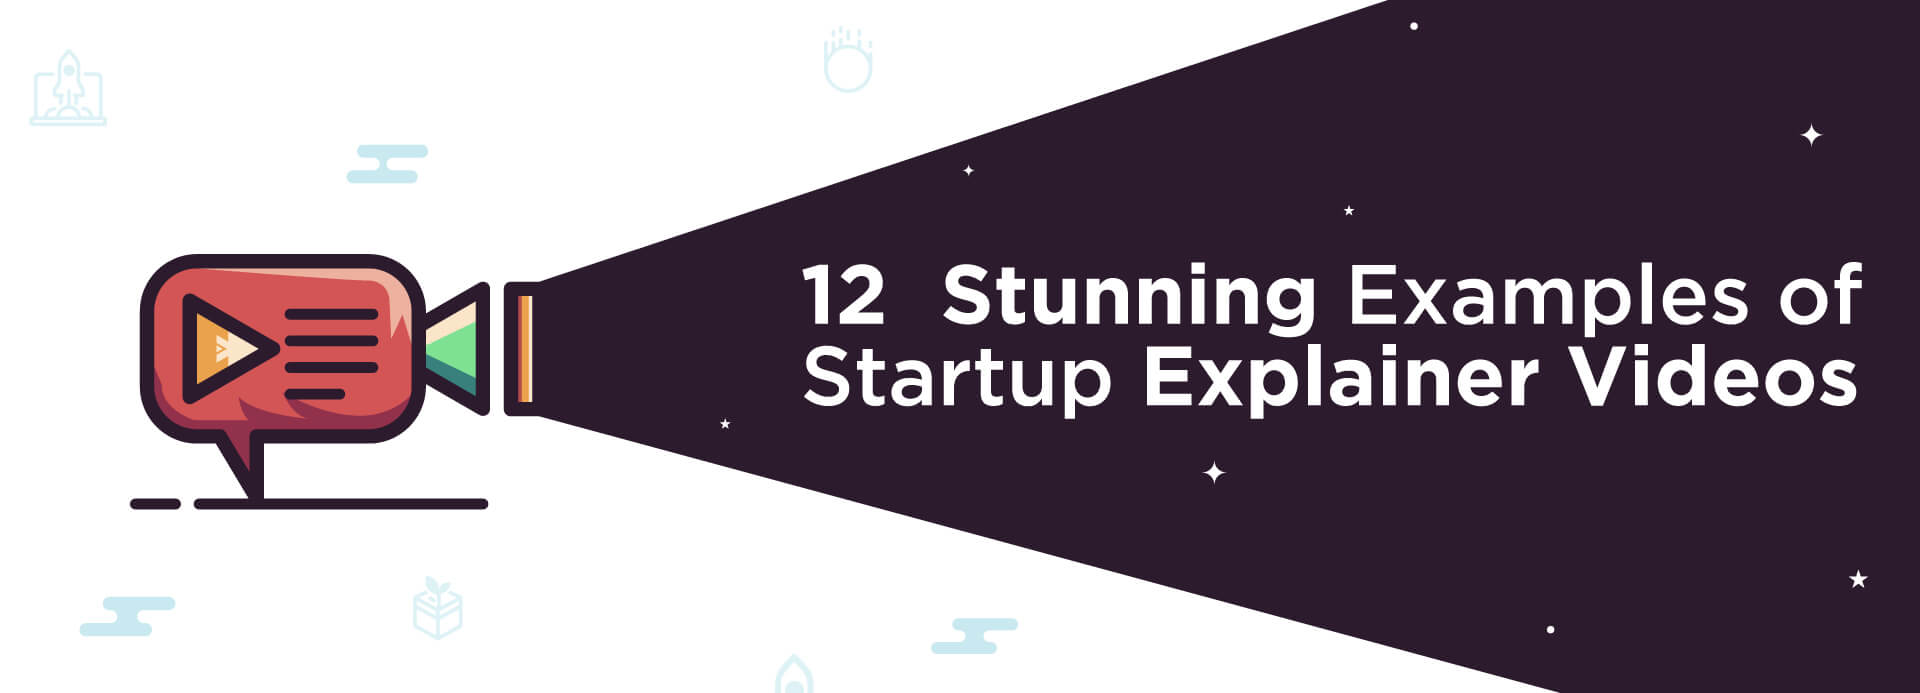 12 Stunning Examples of Startup Explainer Videos (2019 )